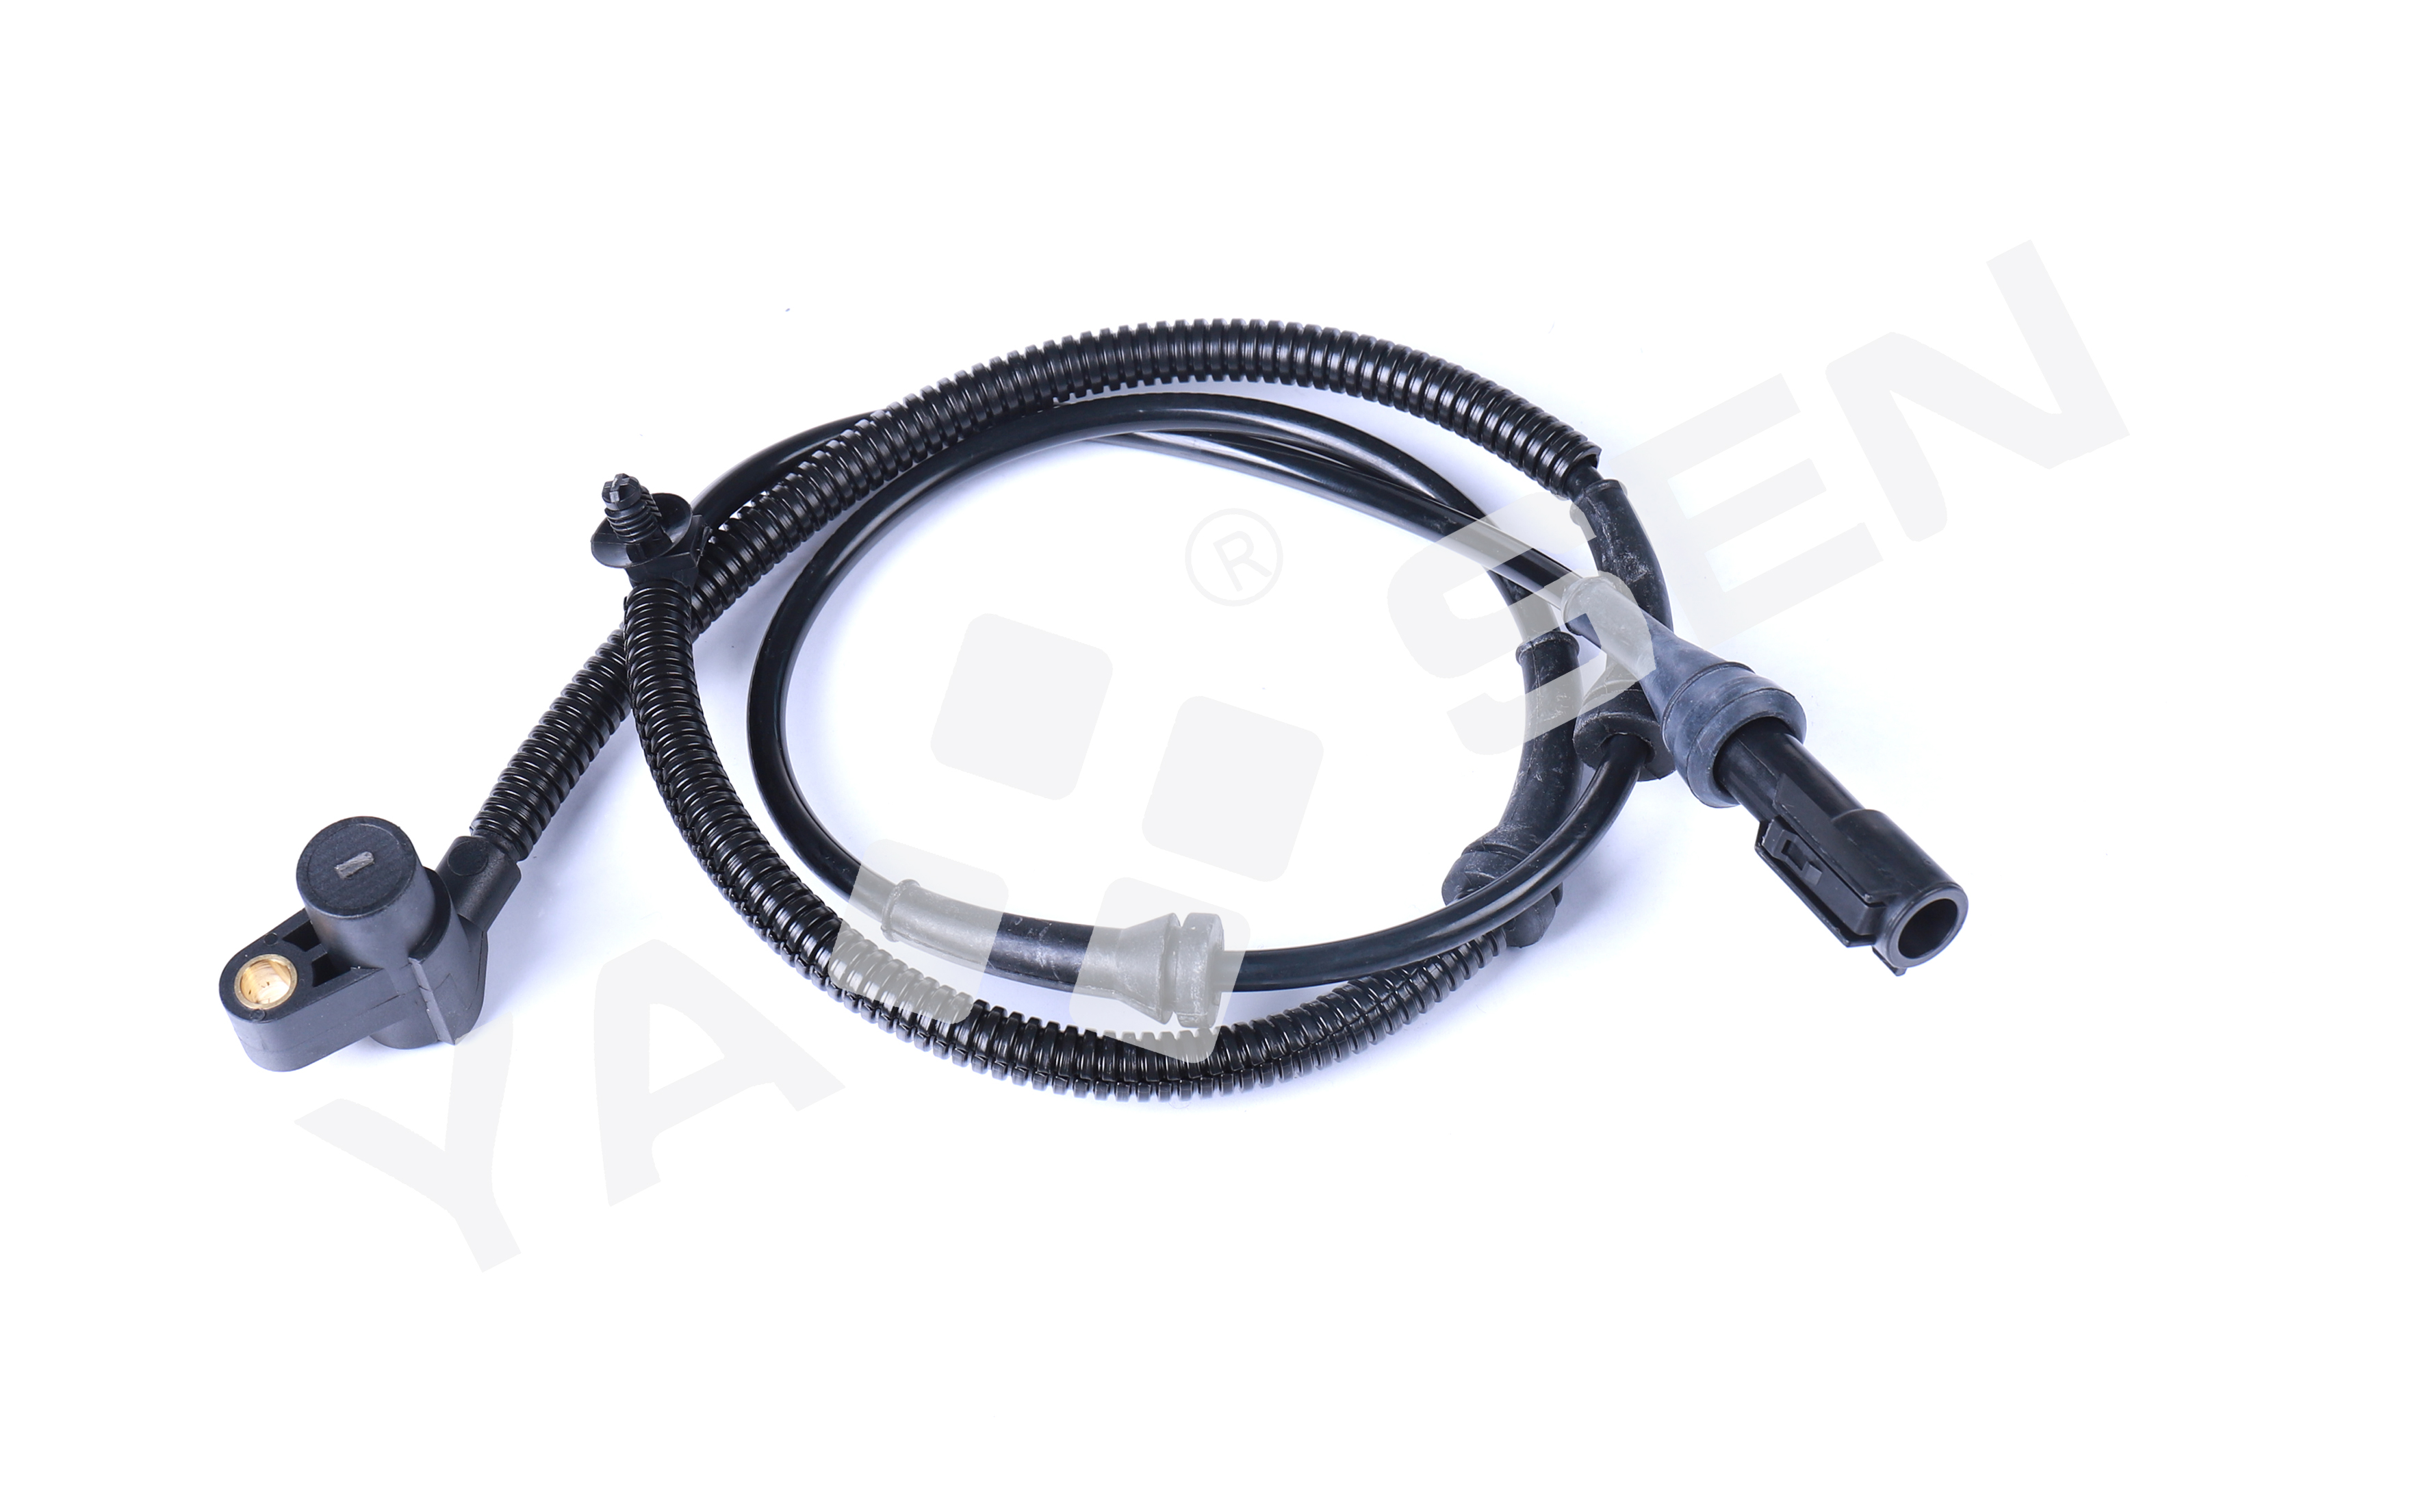 ABS Wheel Speed Sensor for FORD, ALS179 SU7589 410.928 BRAB-104 5S6056 72-5683 5S6055 ABS290 970-247 2ABS0448 256140 72-5682 970